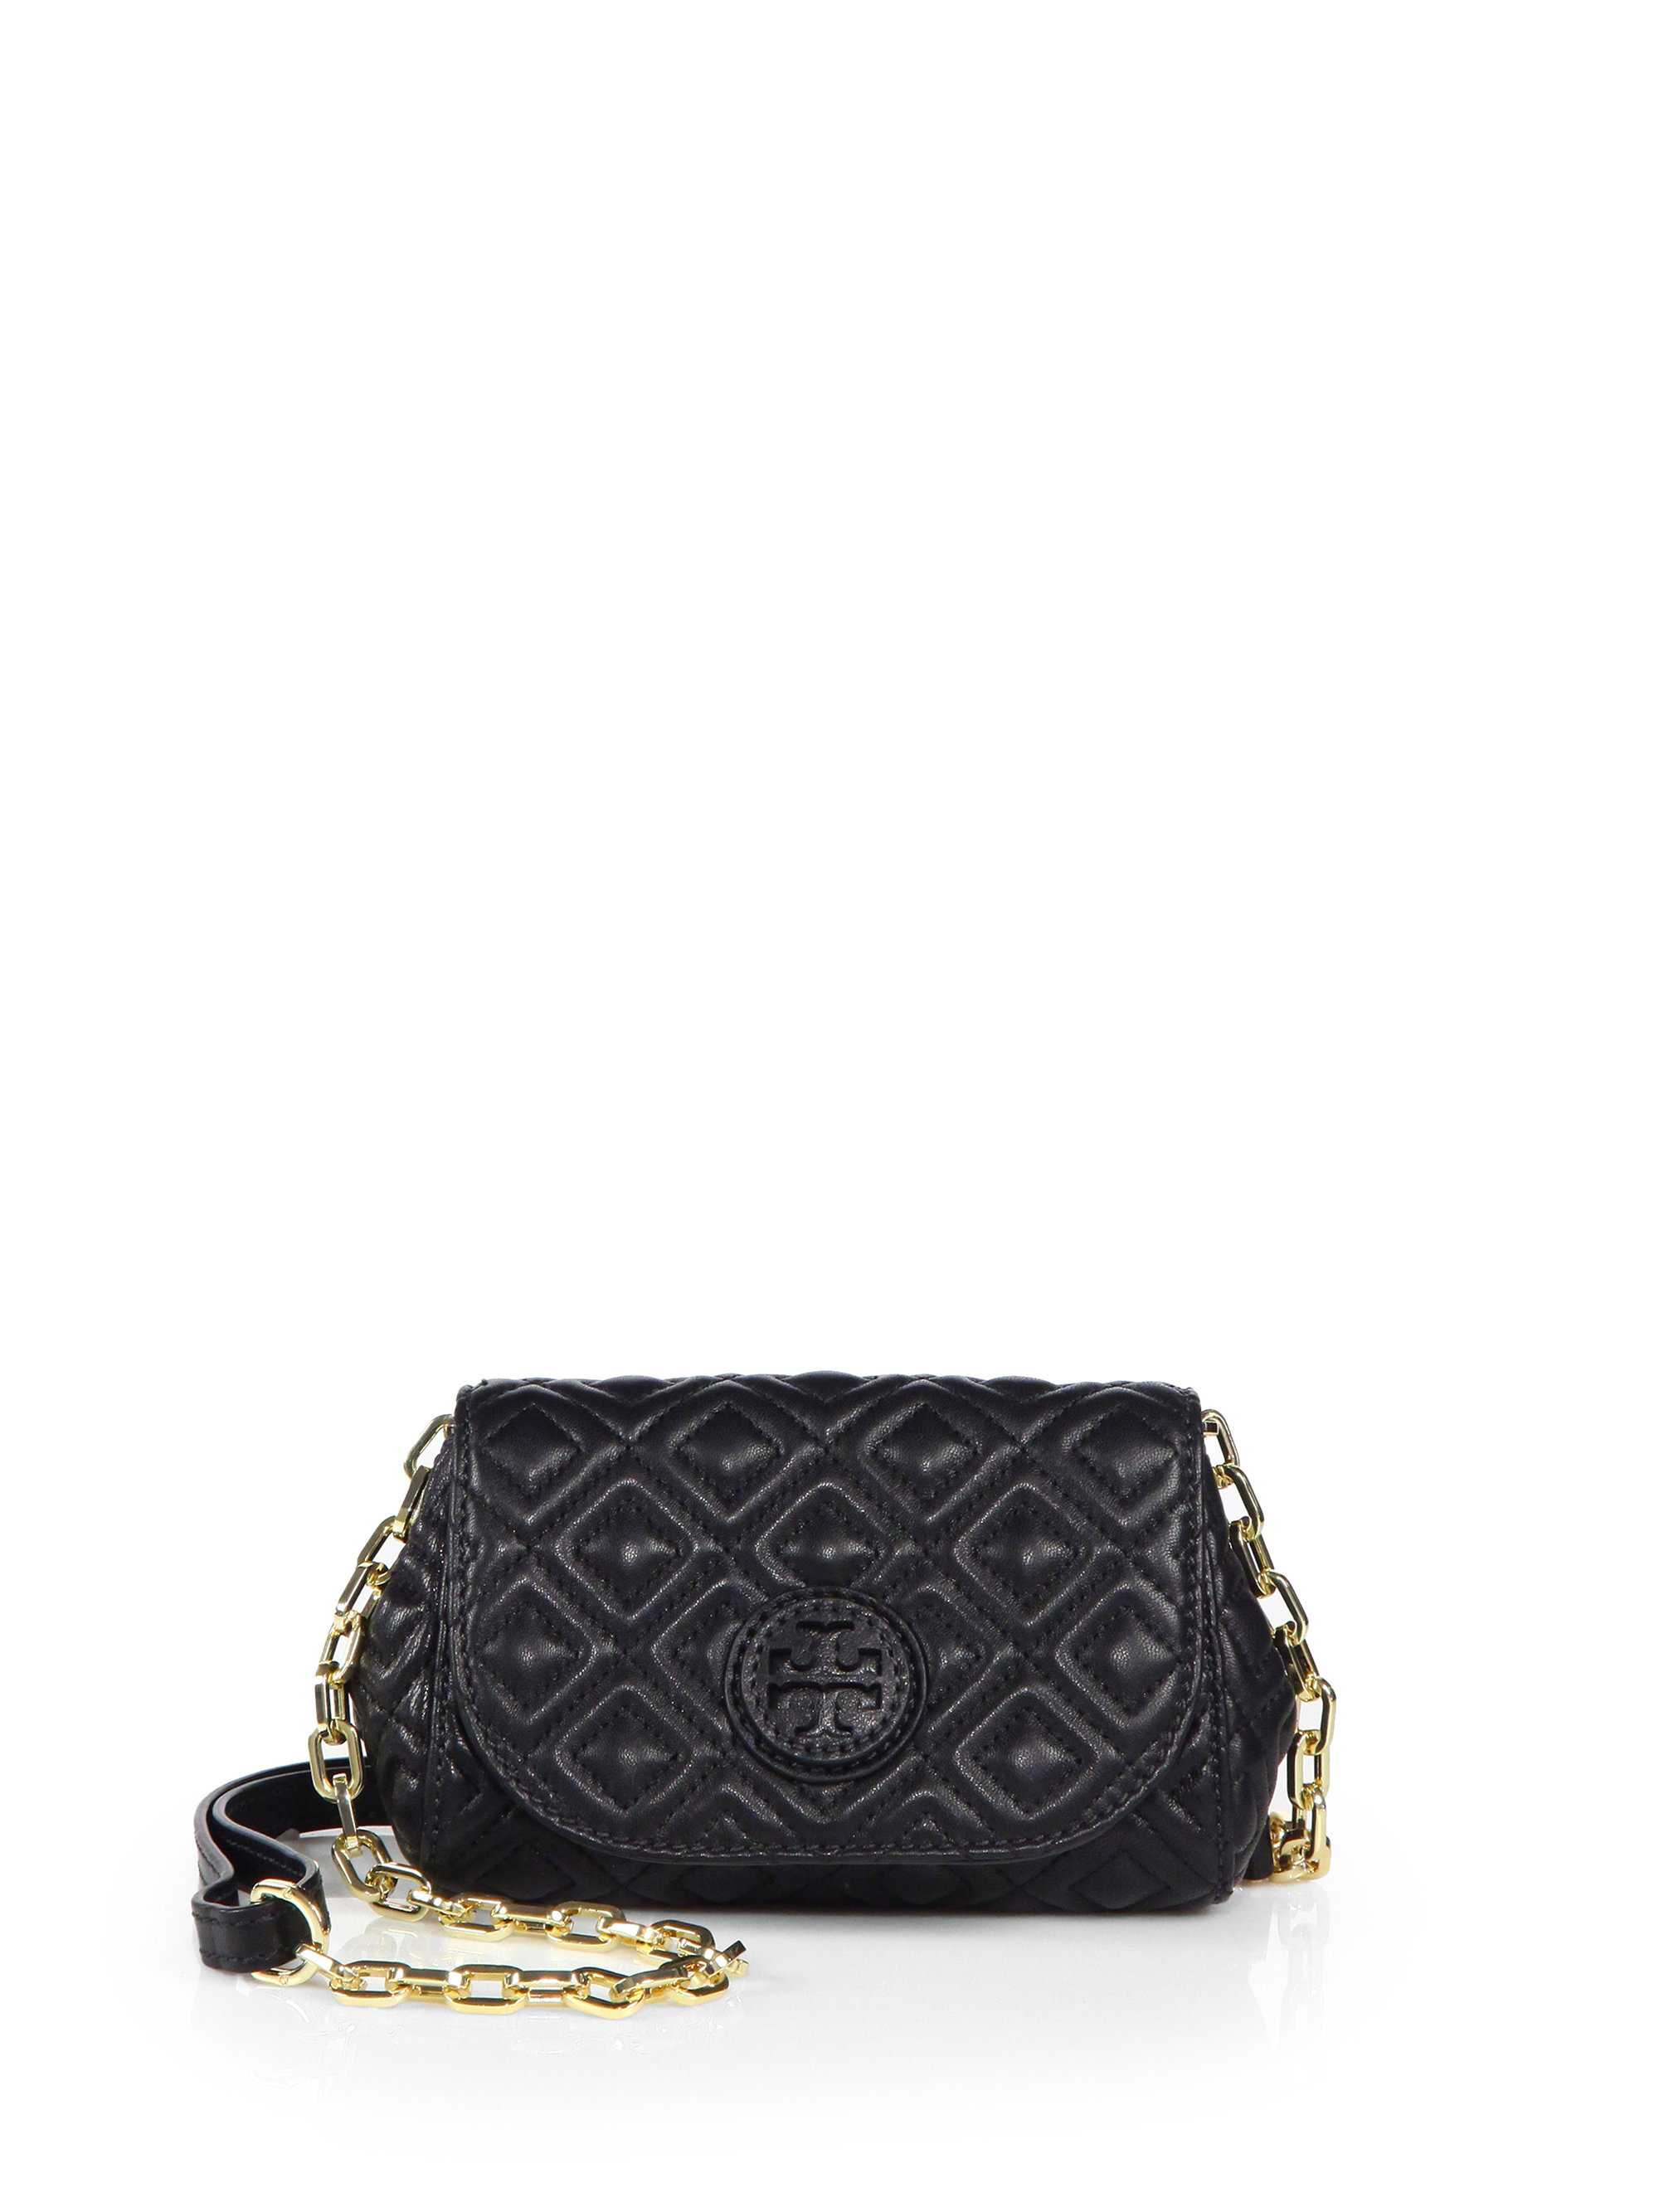 Tory Burch Marion Quilted Small Crossbody Bag in Black | Lyst